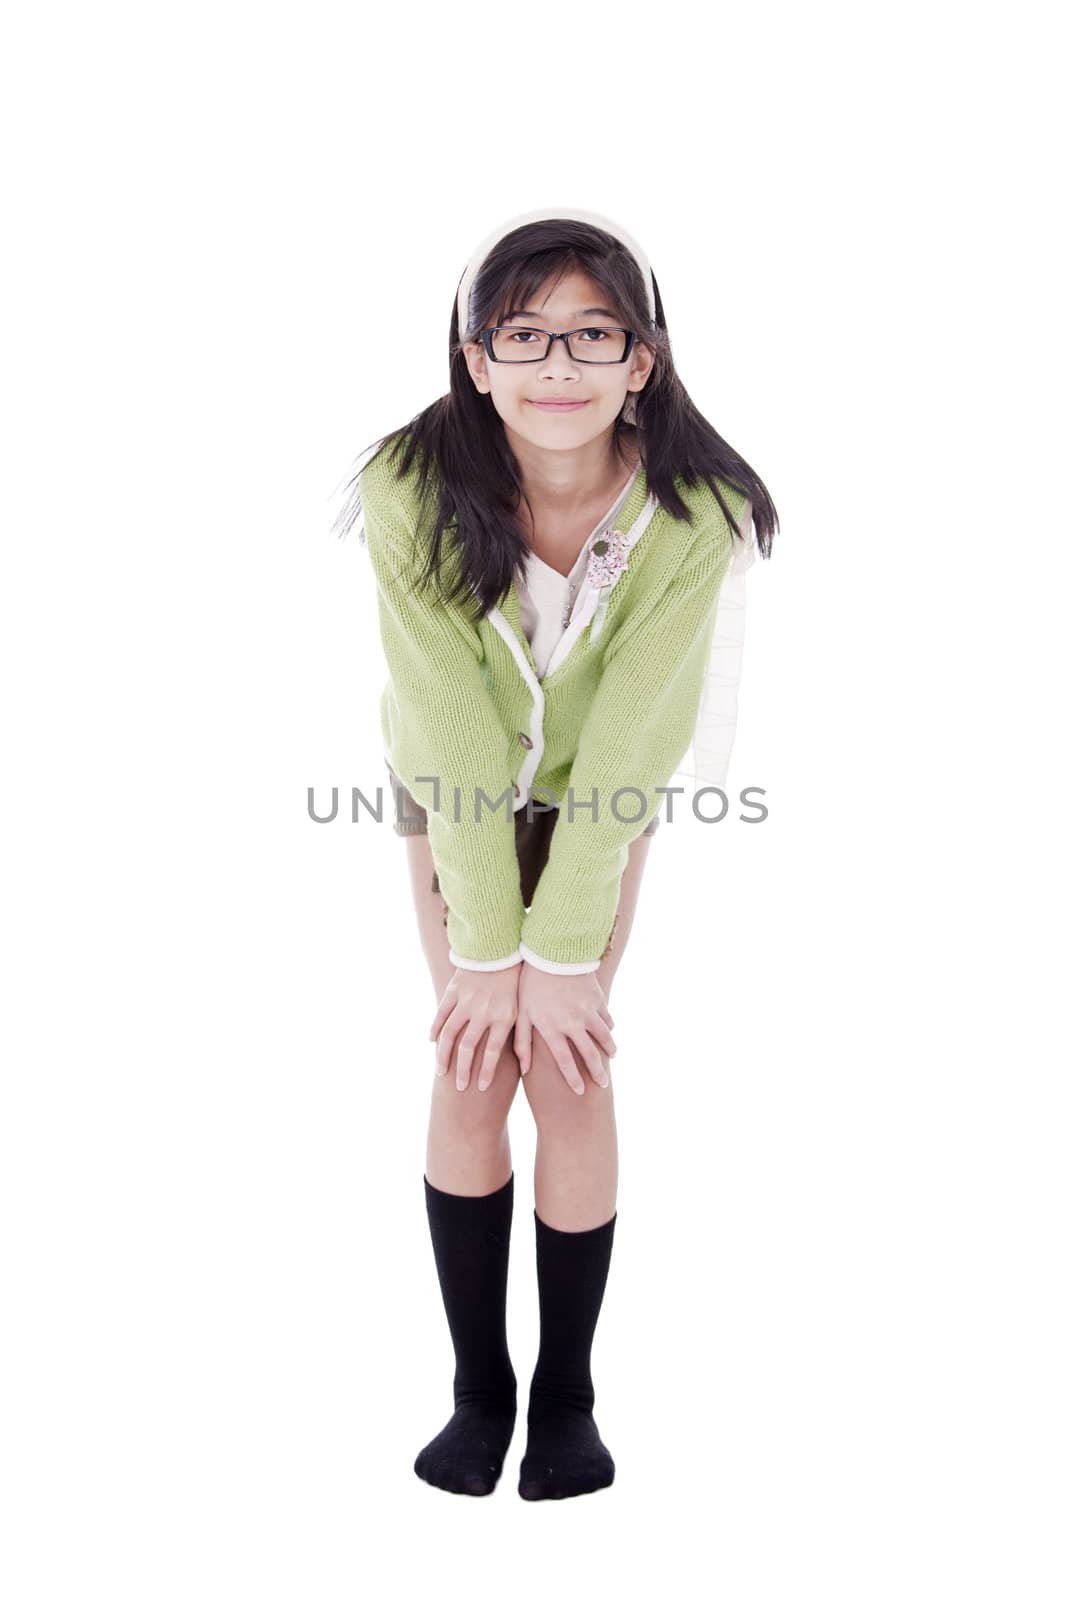 Girl in green sweater and glasses bending forward, hand on knees by jarenwicklund